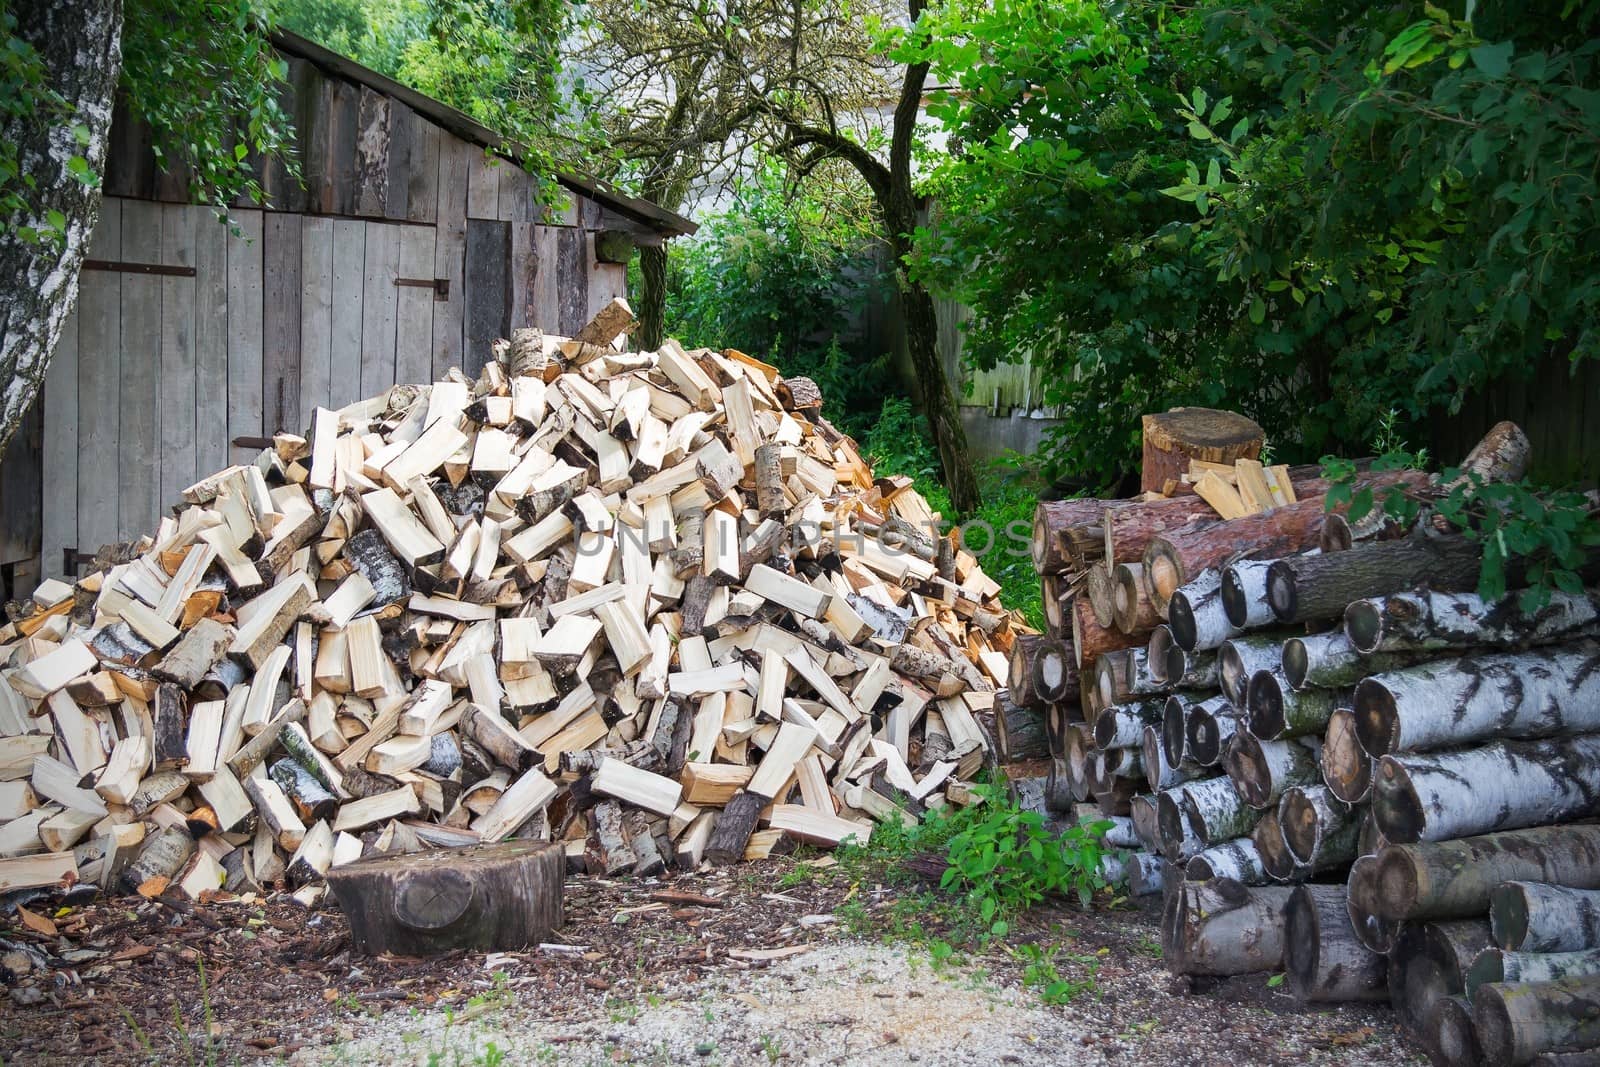 Stack of firewood in rural areas by simpson33